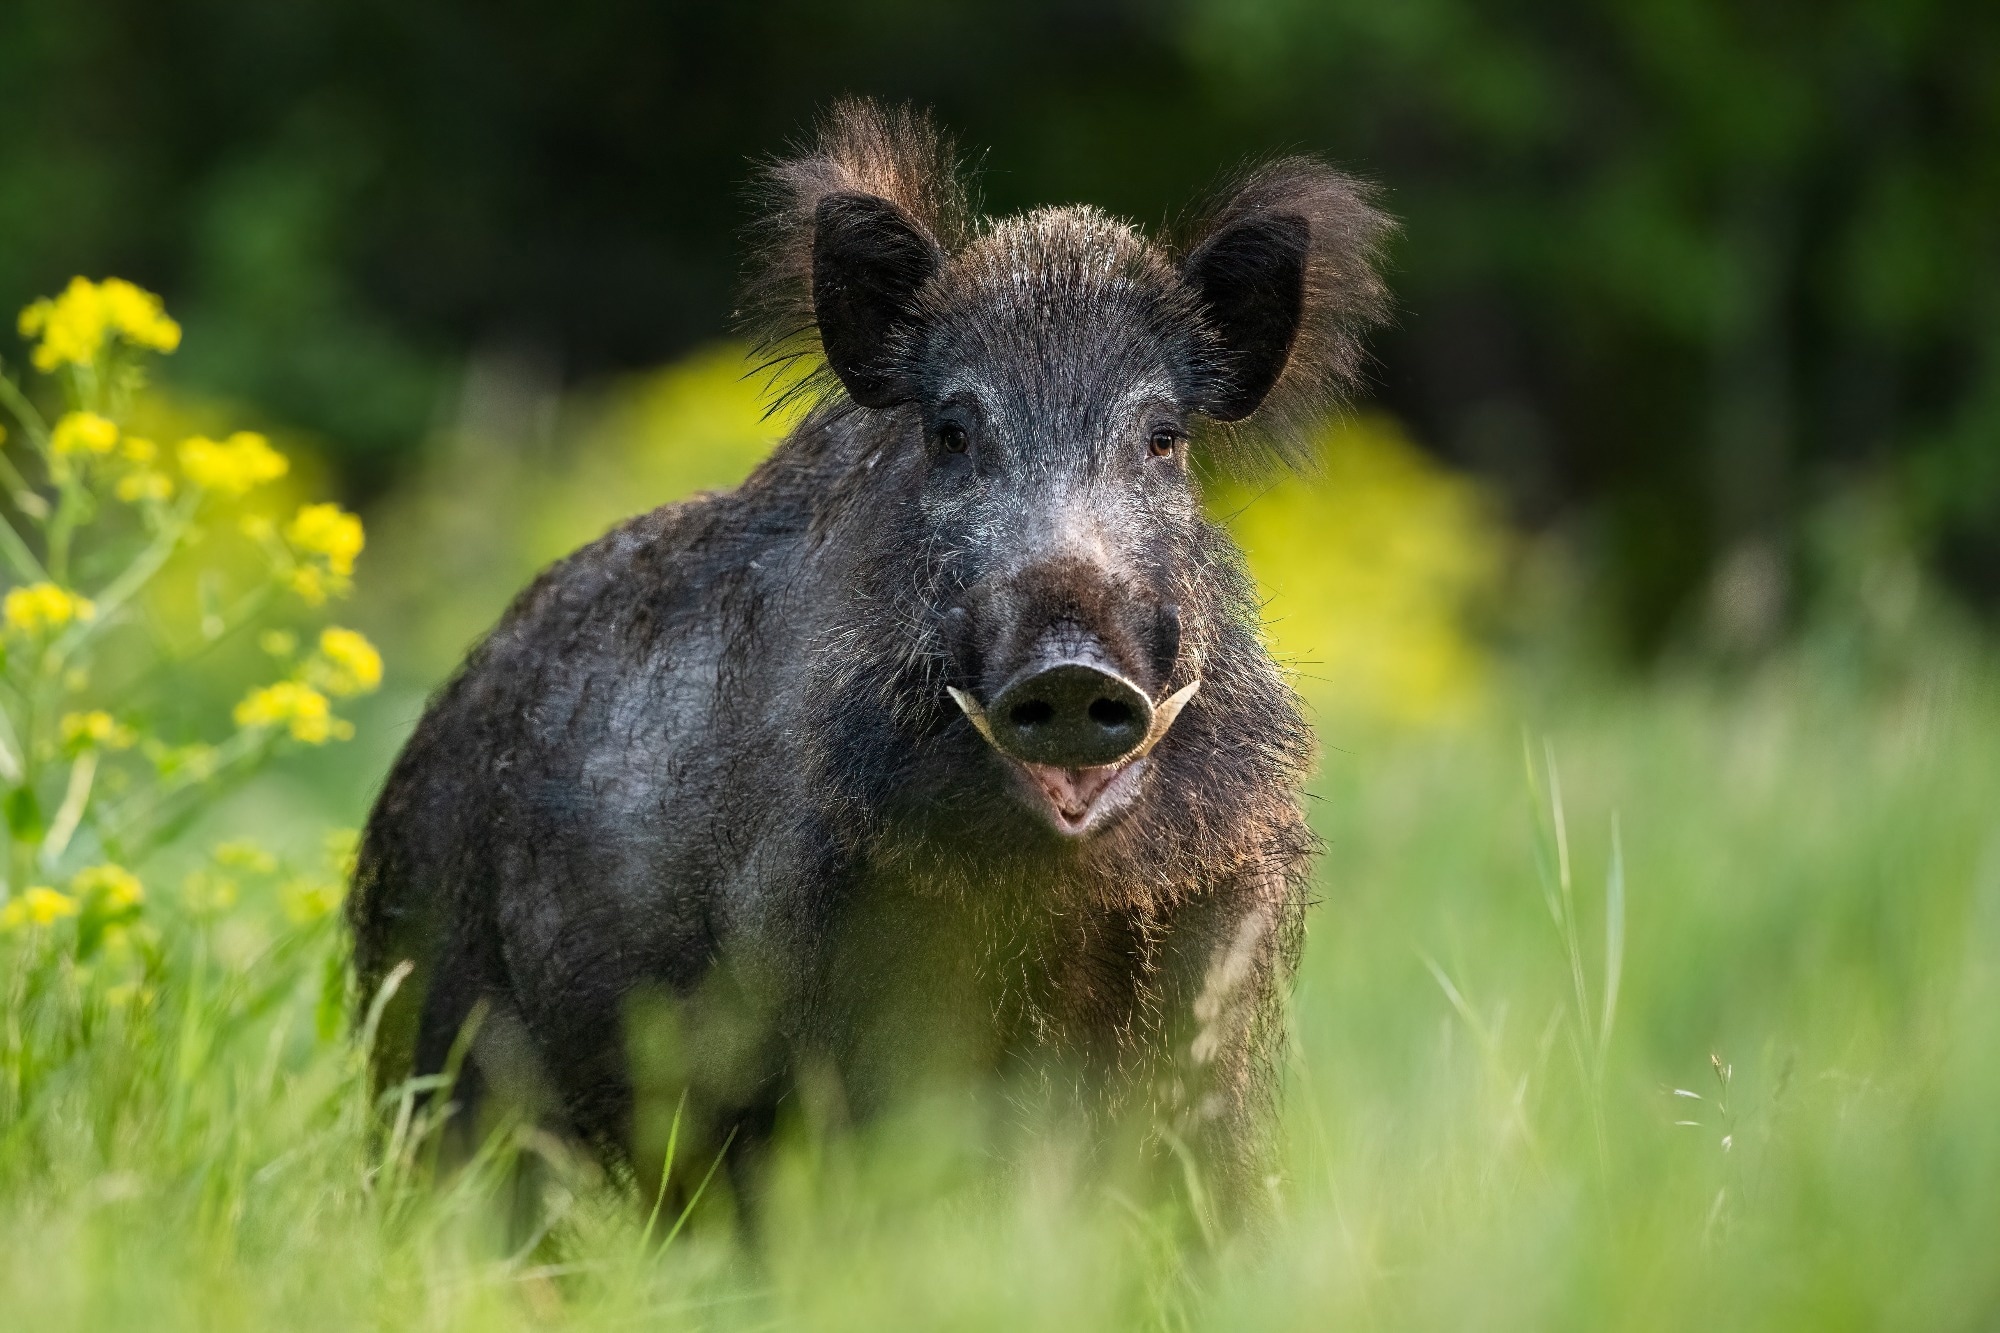 Study: Hepatitis E Virus in the Wild Boar Population: What Is the Real Zoonotic Risk in Portugal? Image Credit: Erik Mandre/Shutterstock.com